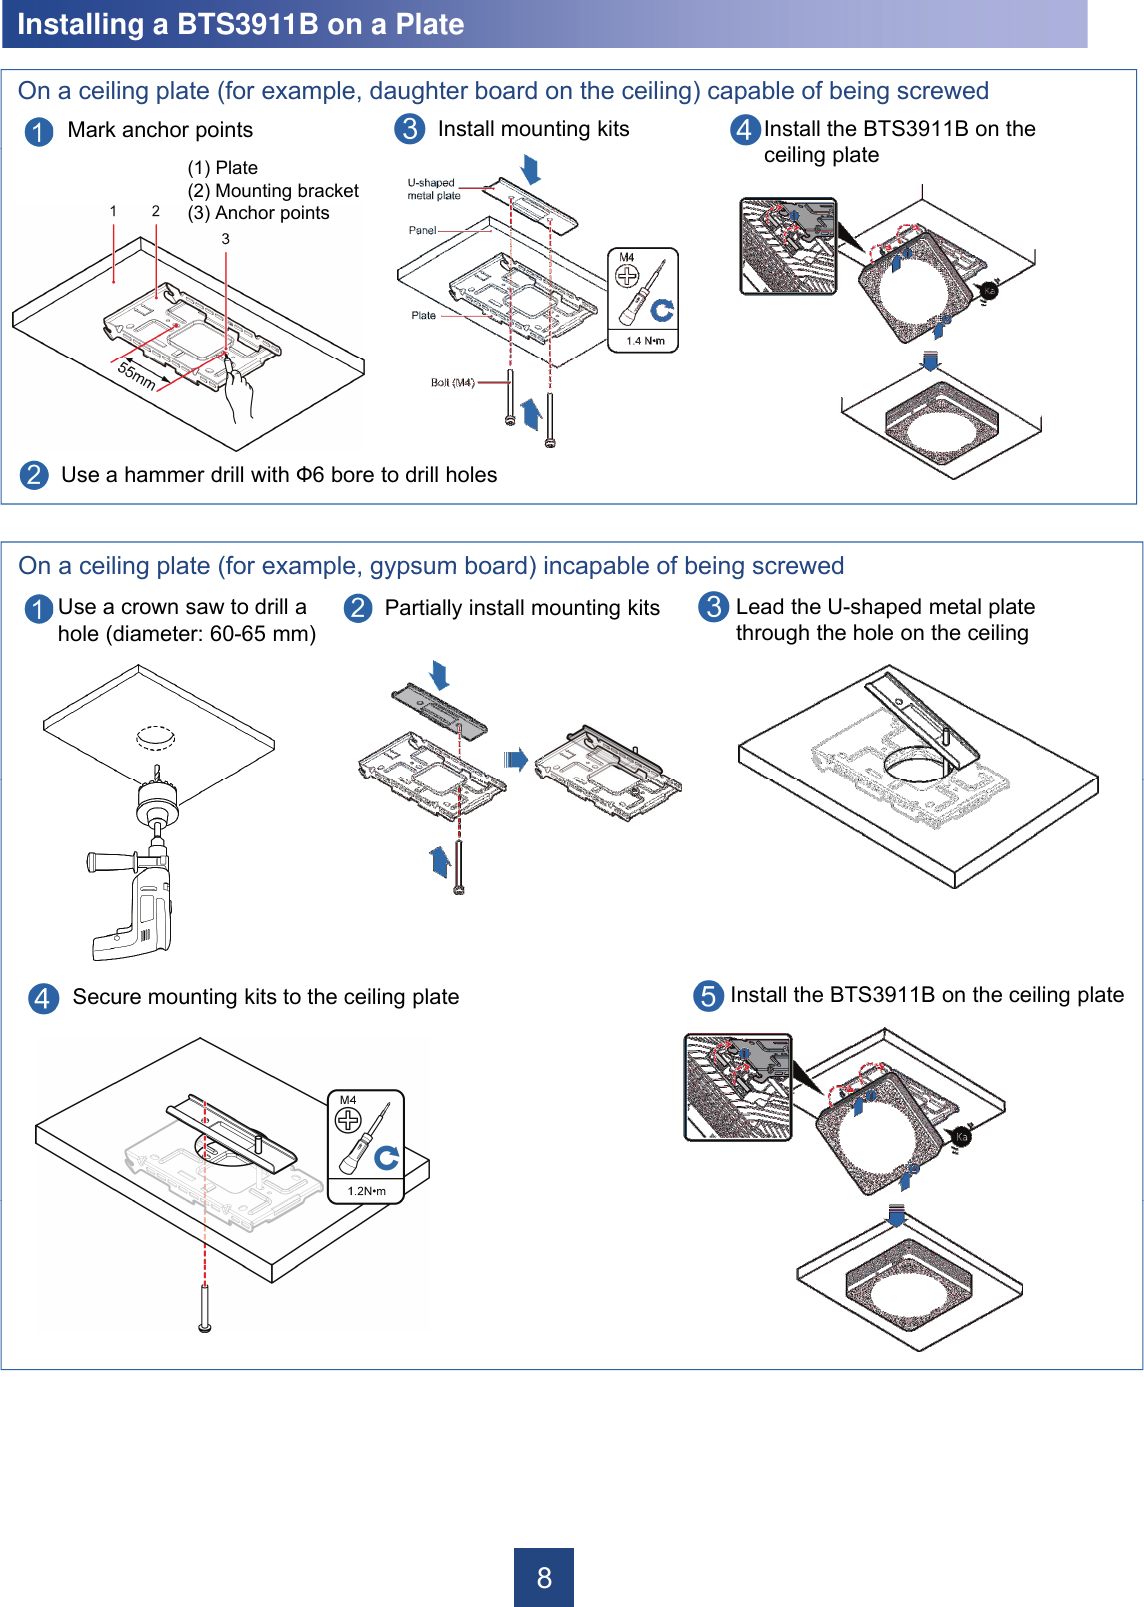 Install mouMark anchor pointsInstalling a BTS3911B on a PlateOn a ceiling plate (for example, daughter board (1) Plate(2) Mounting bracket(3) Anchor pointsUse a hammer drill with Ф6 bore to drill holesOn a ceiling plate (for example gypsum board)Partially install mUse a crown saw to drill a hole (diameter: 60-65 mm)On a ceiling plate (for example, gypsum board) S ti kit t th ili l tSecure mounting kits to the ceiling plate8nting kits Install the BTS3911B on the ili l ton the ceiling) capable of being screwedceiling plateincapable of being screwedmounting kits Lead the U-shaped metal plate through the hole on the ceilingincapable of being screwedI t ll th BTS3911B th ili l tInstall the BTS3911B on the ceiling plate8